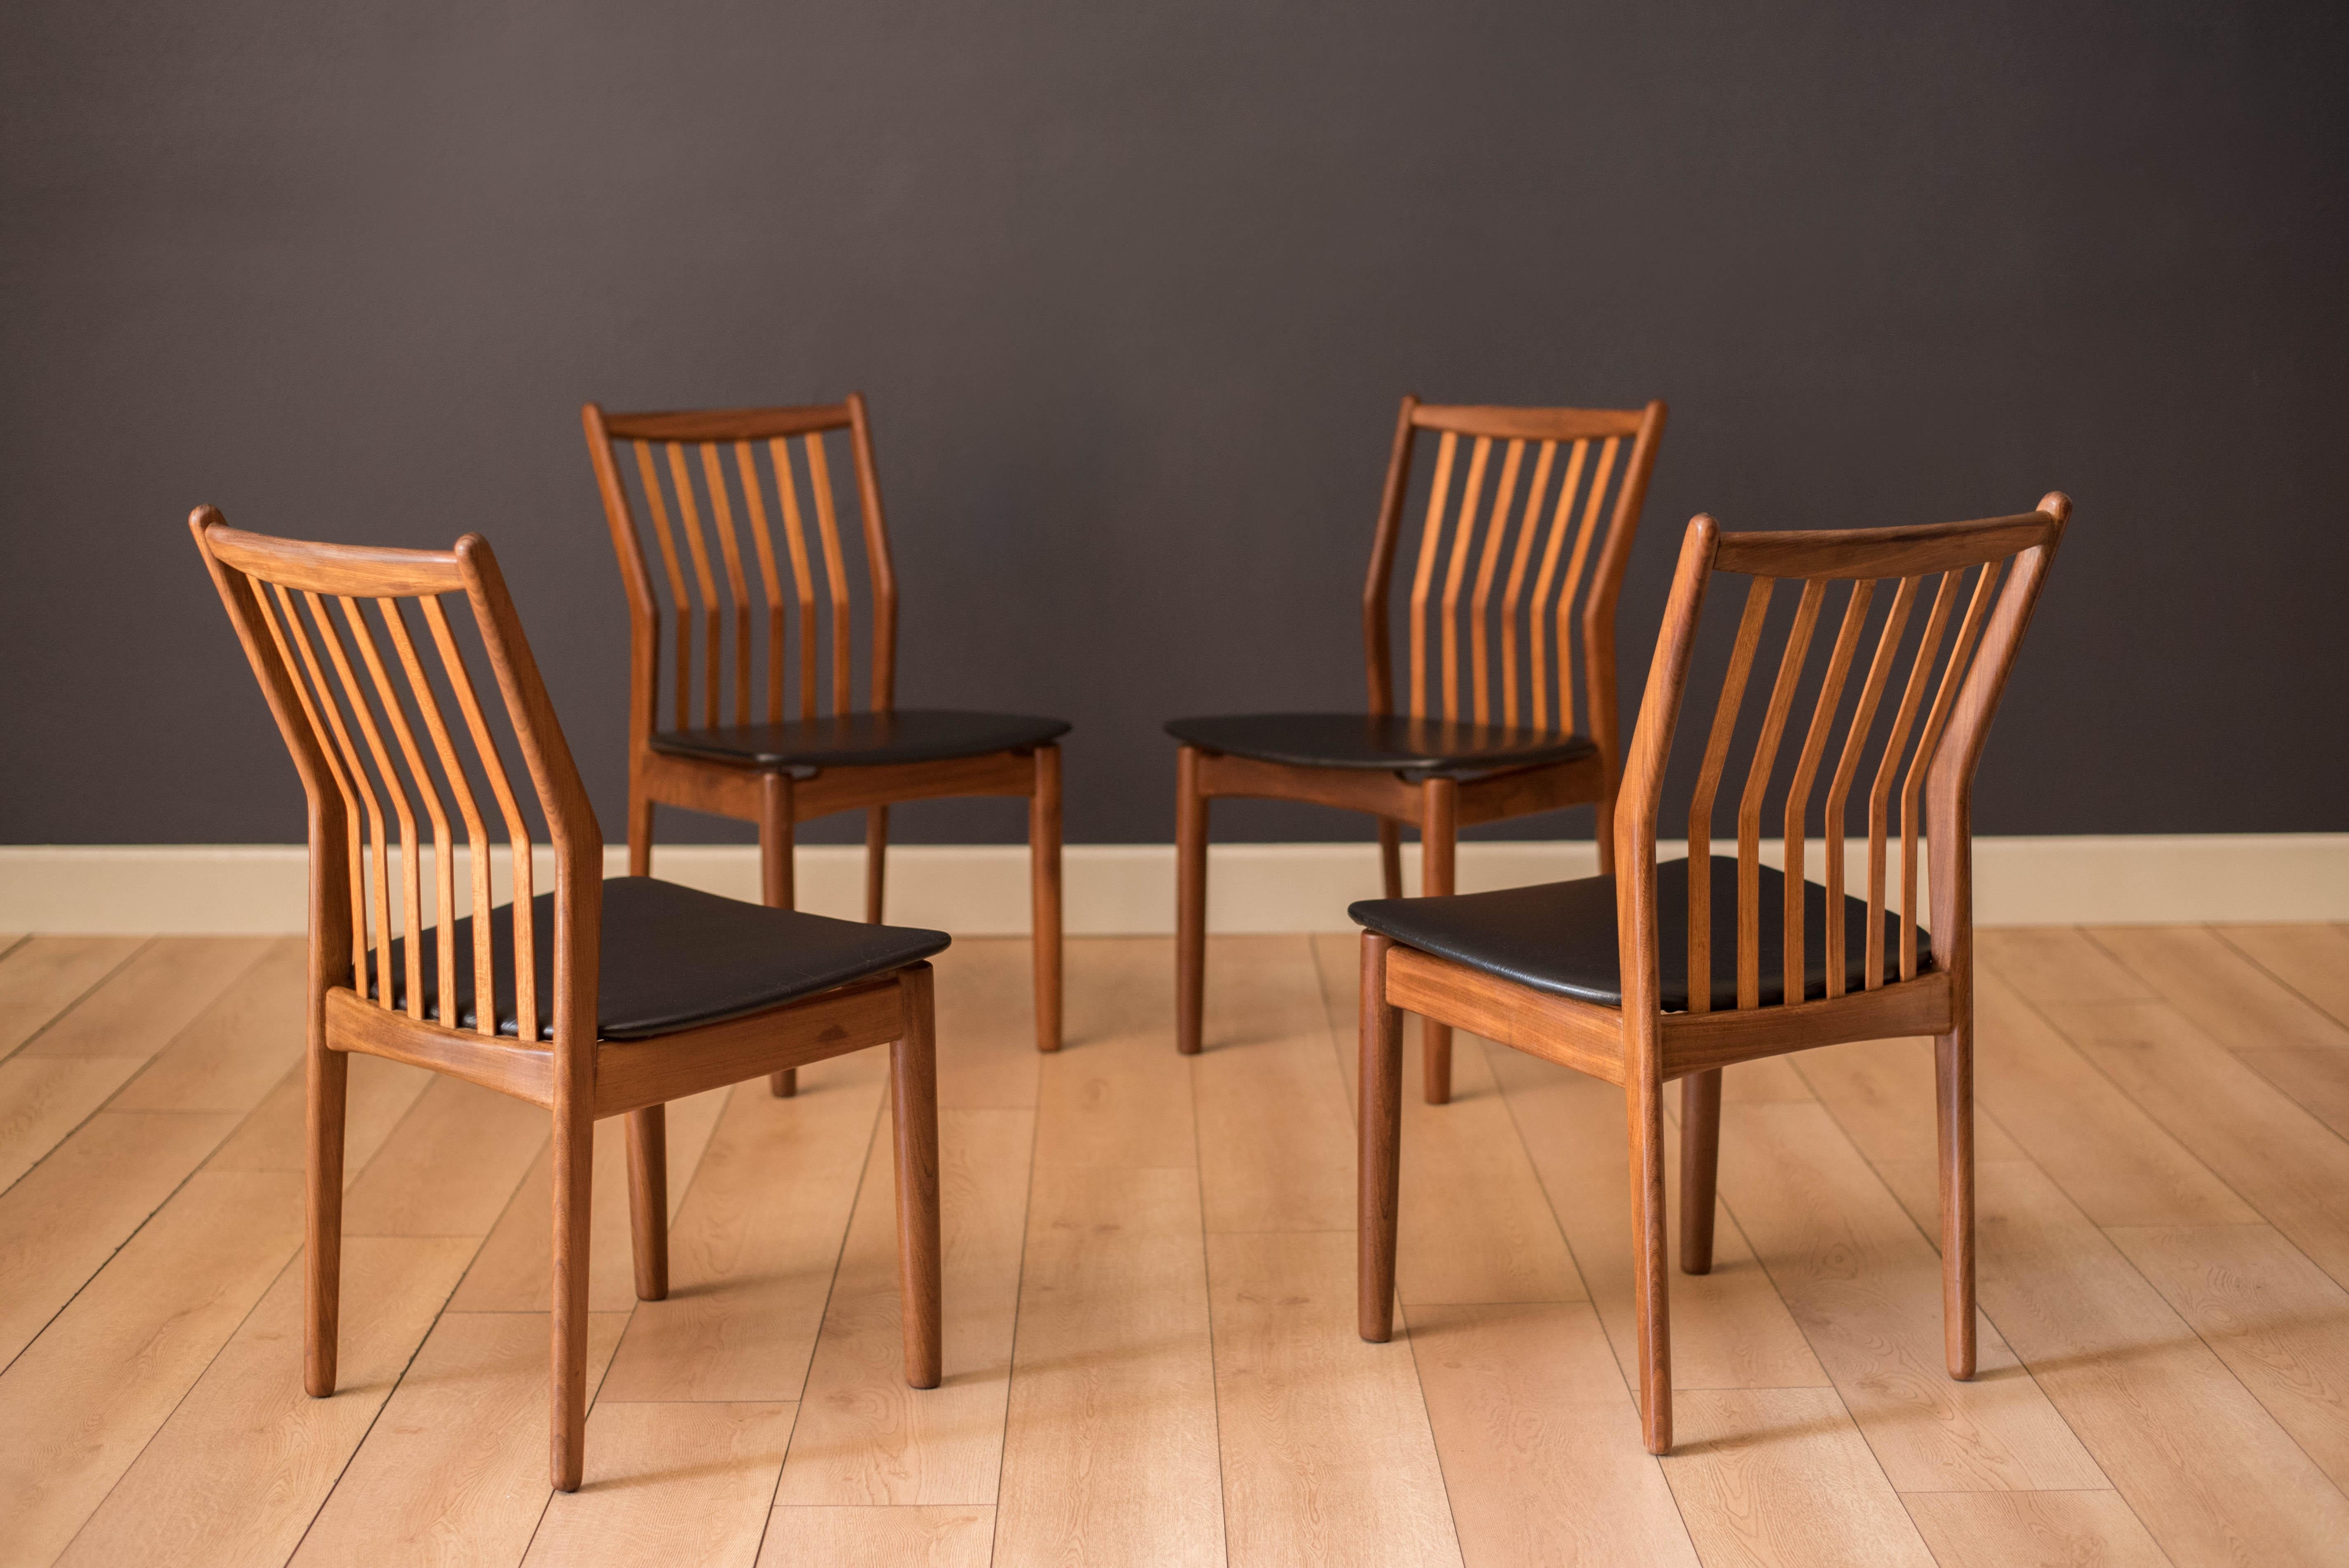 Mid-Century Modern set of four dining chairs in teak and afromasia by Svend Madsen for Moreddi, Denmark circa 1960's. Features a supporting curved backrest and a wide frame seat unusual for Danish design. Retains the original black leatherette